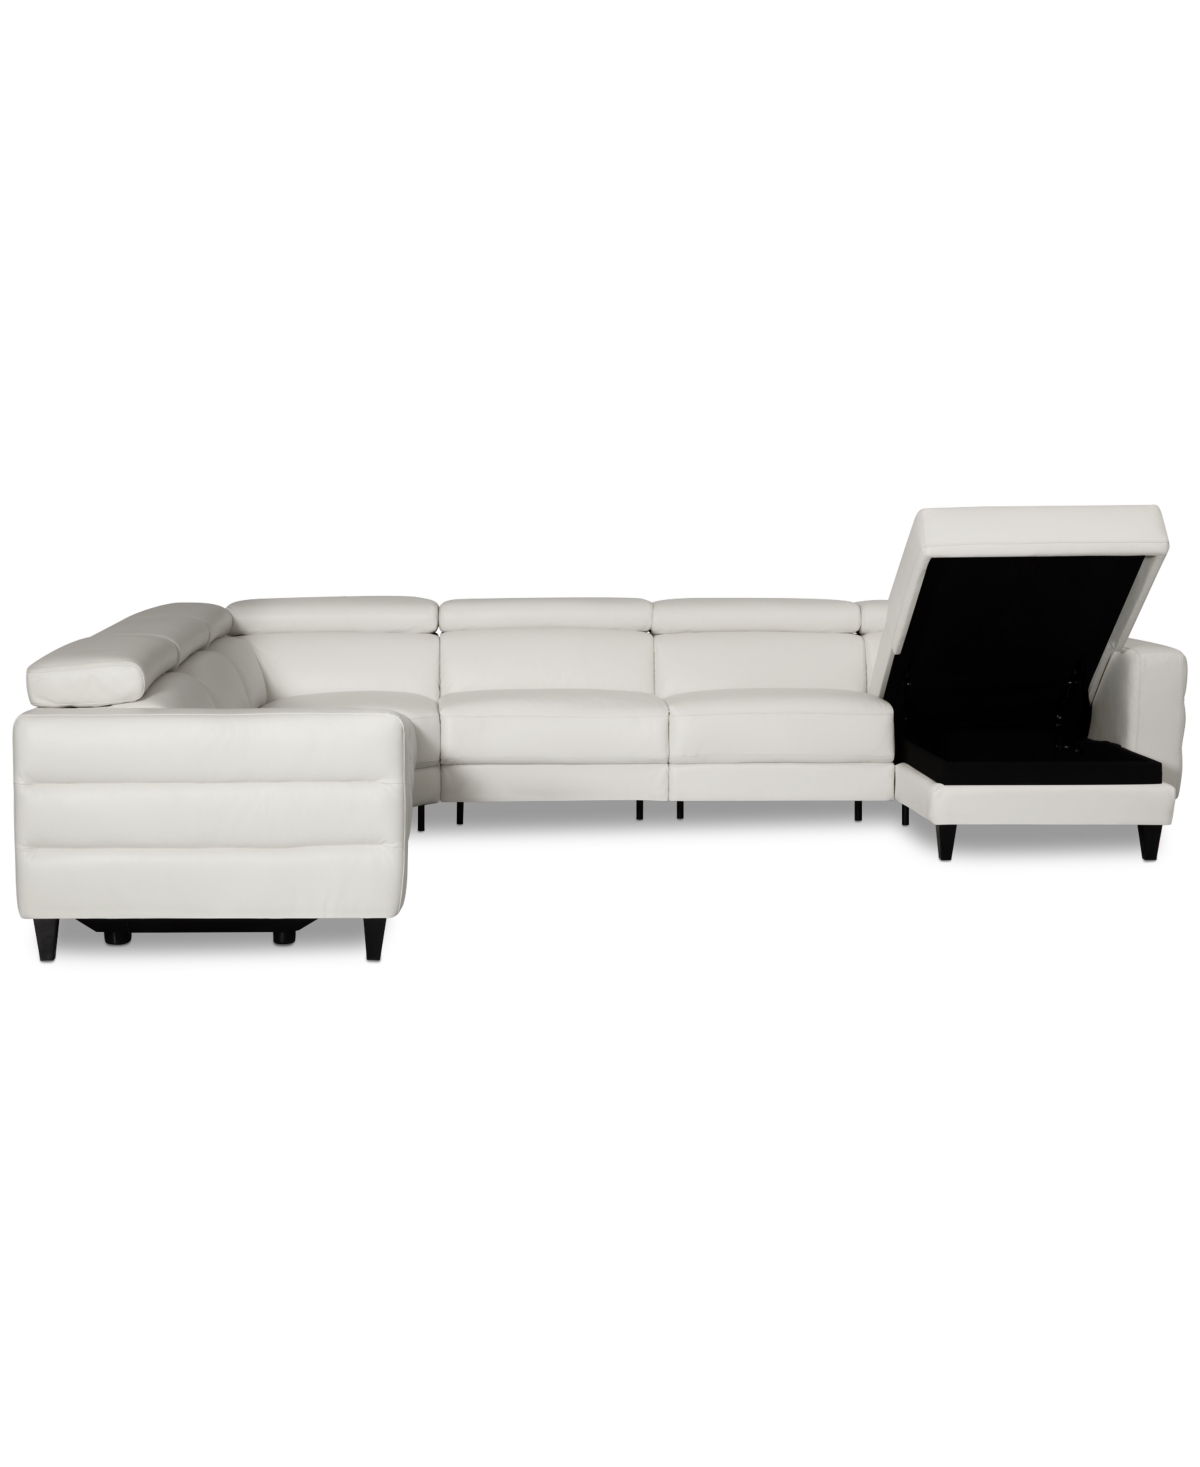 Shop Furniture Silvanah 6-pc. Leather Sectional With Storage Chaise And 3 Power Recliners, Created For Macy's In Snow